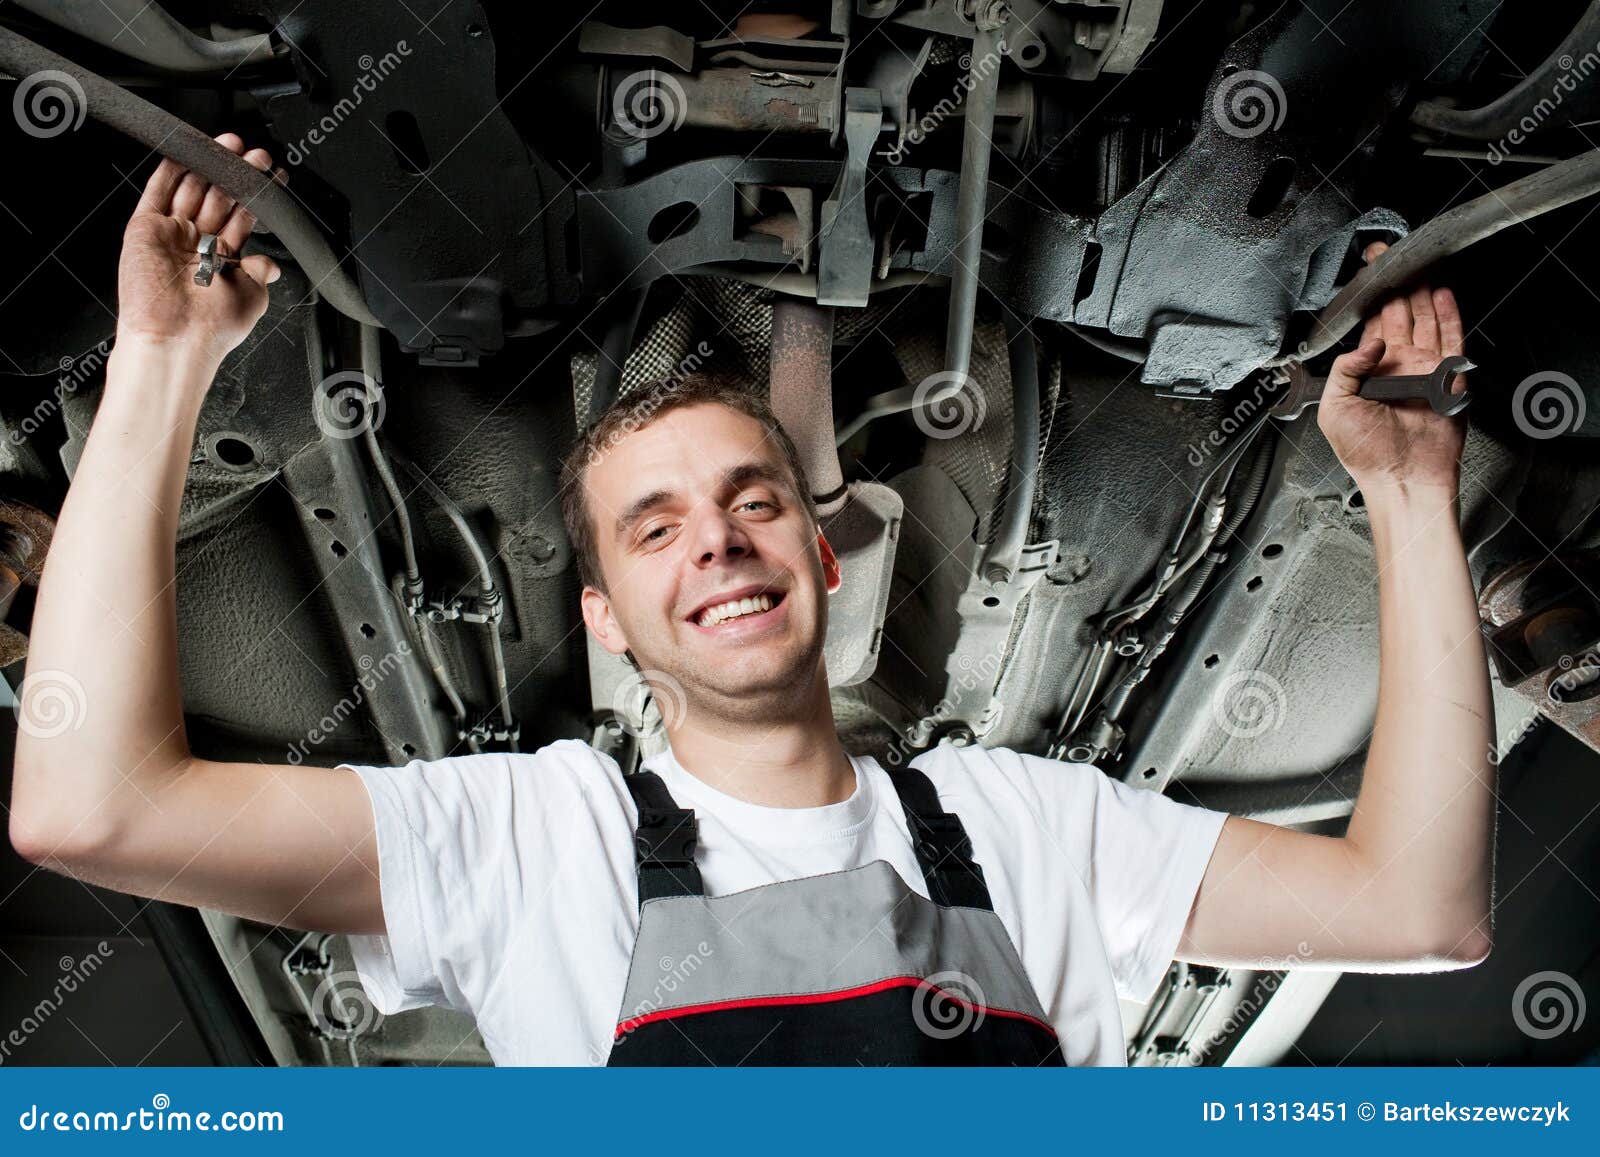 Young Mechanic Working Below The Car In Garage Stock Image - Image ...